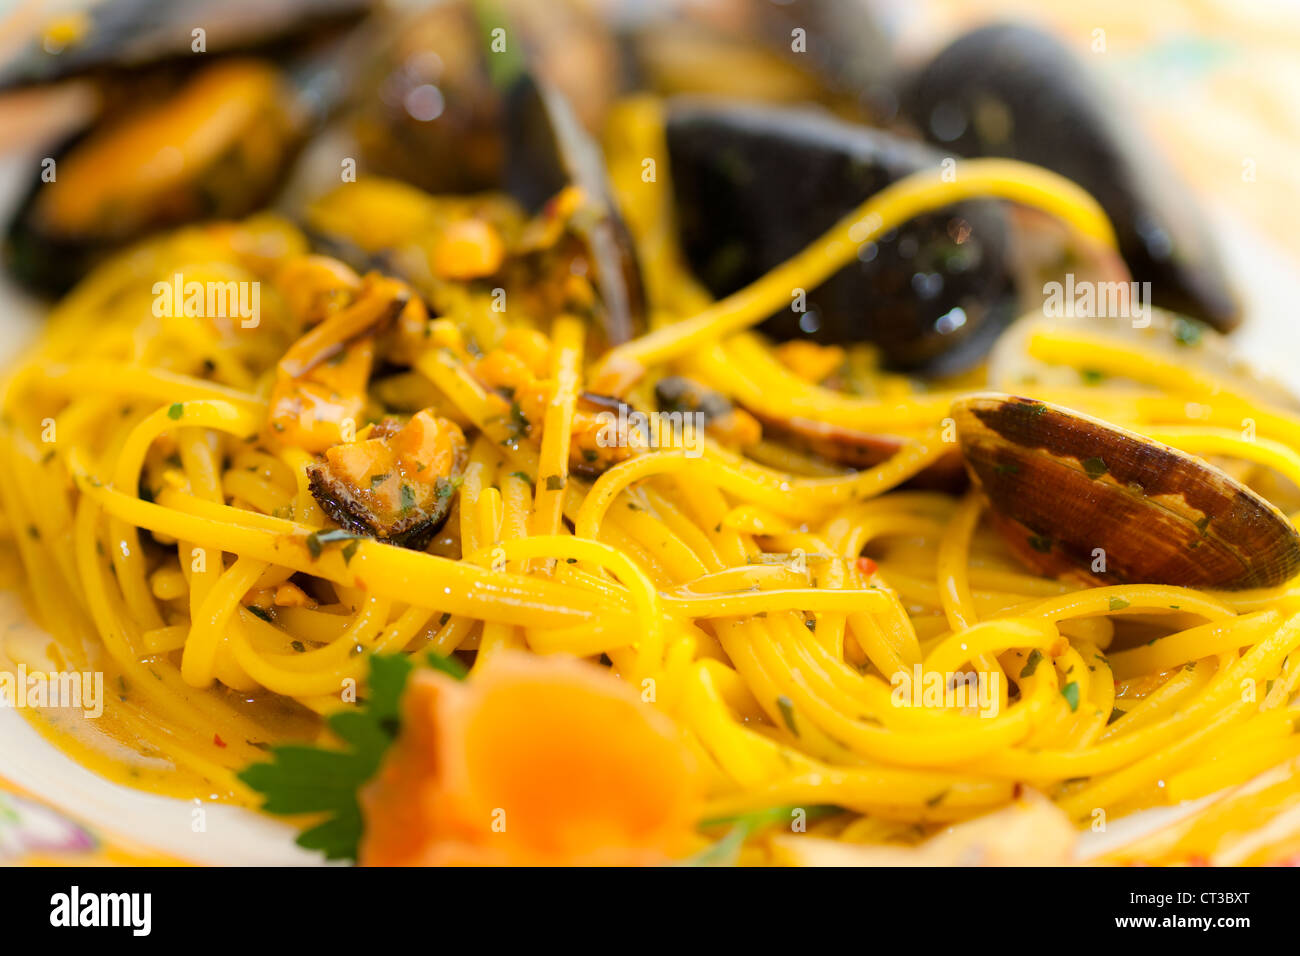 Spaghetti with mussels, clams and Saffron. Stock Photo